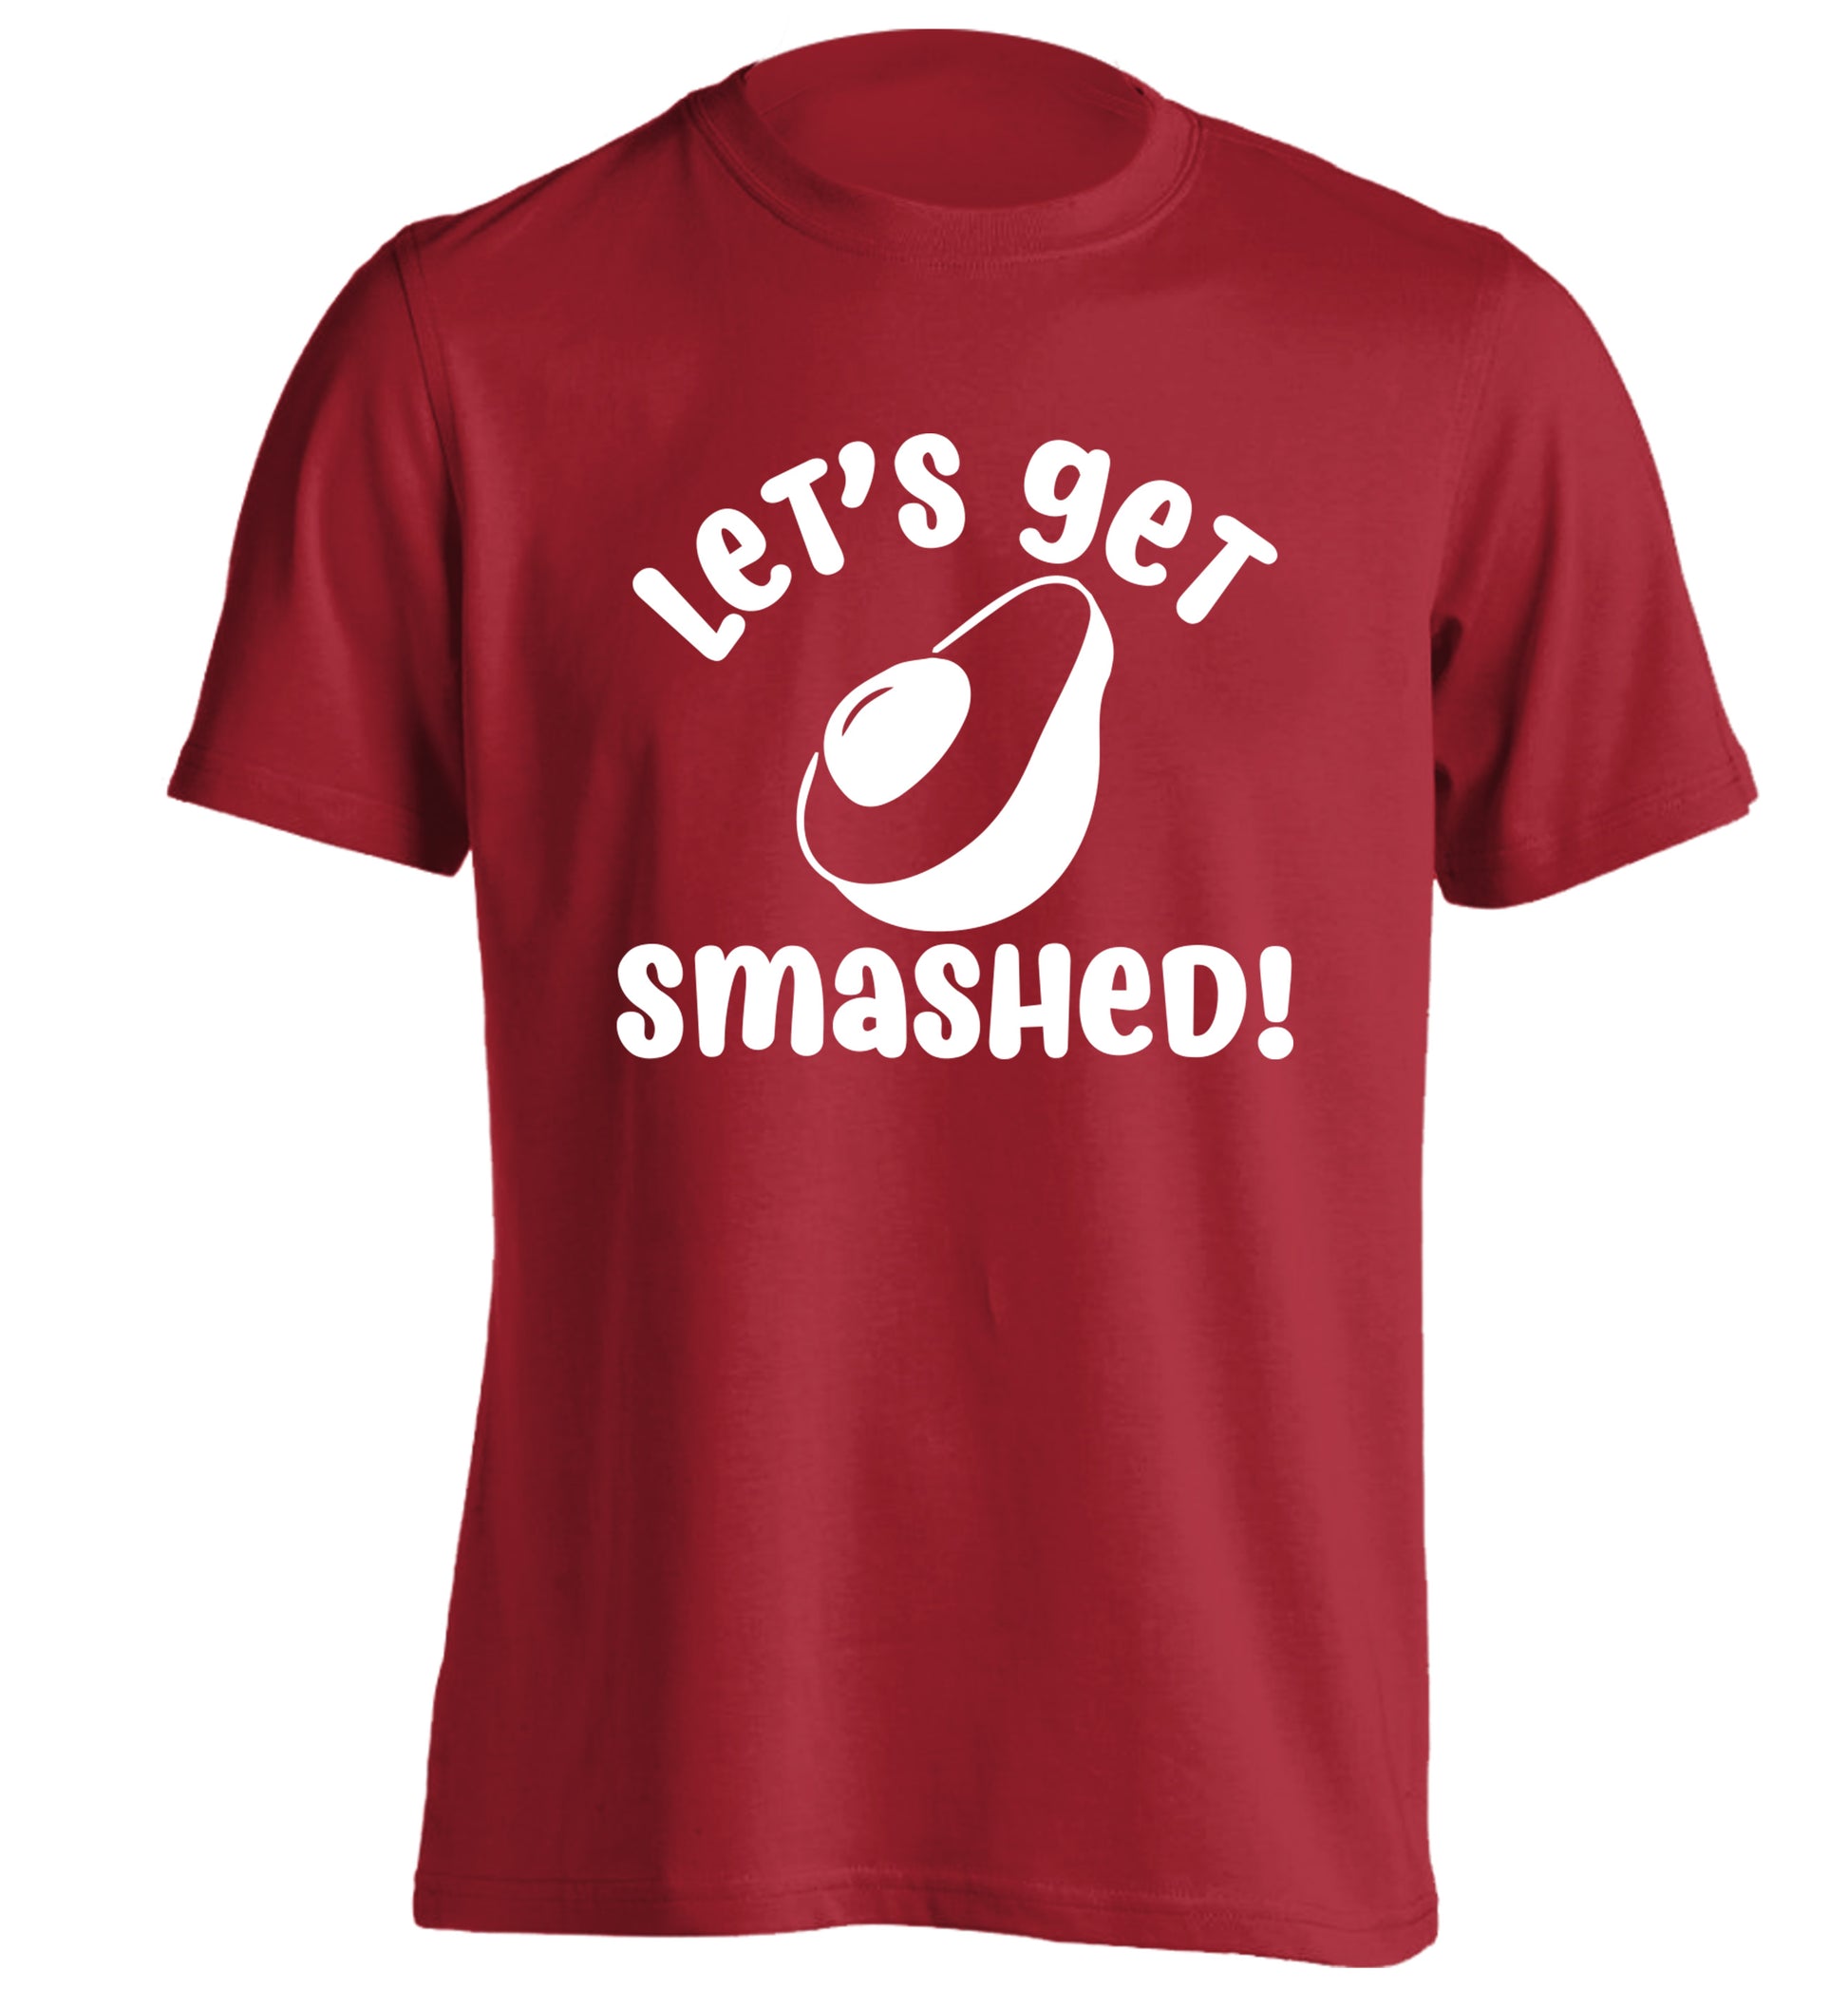 Let's get smashed adults unisex red Tshirt 2XL